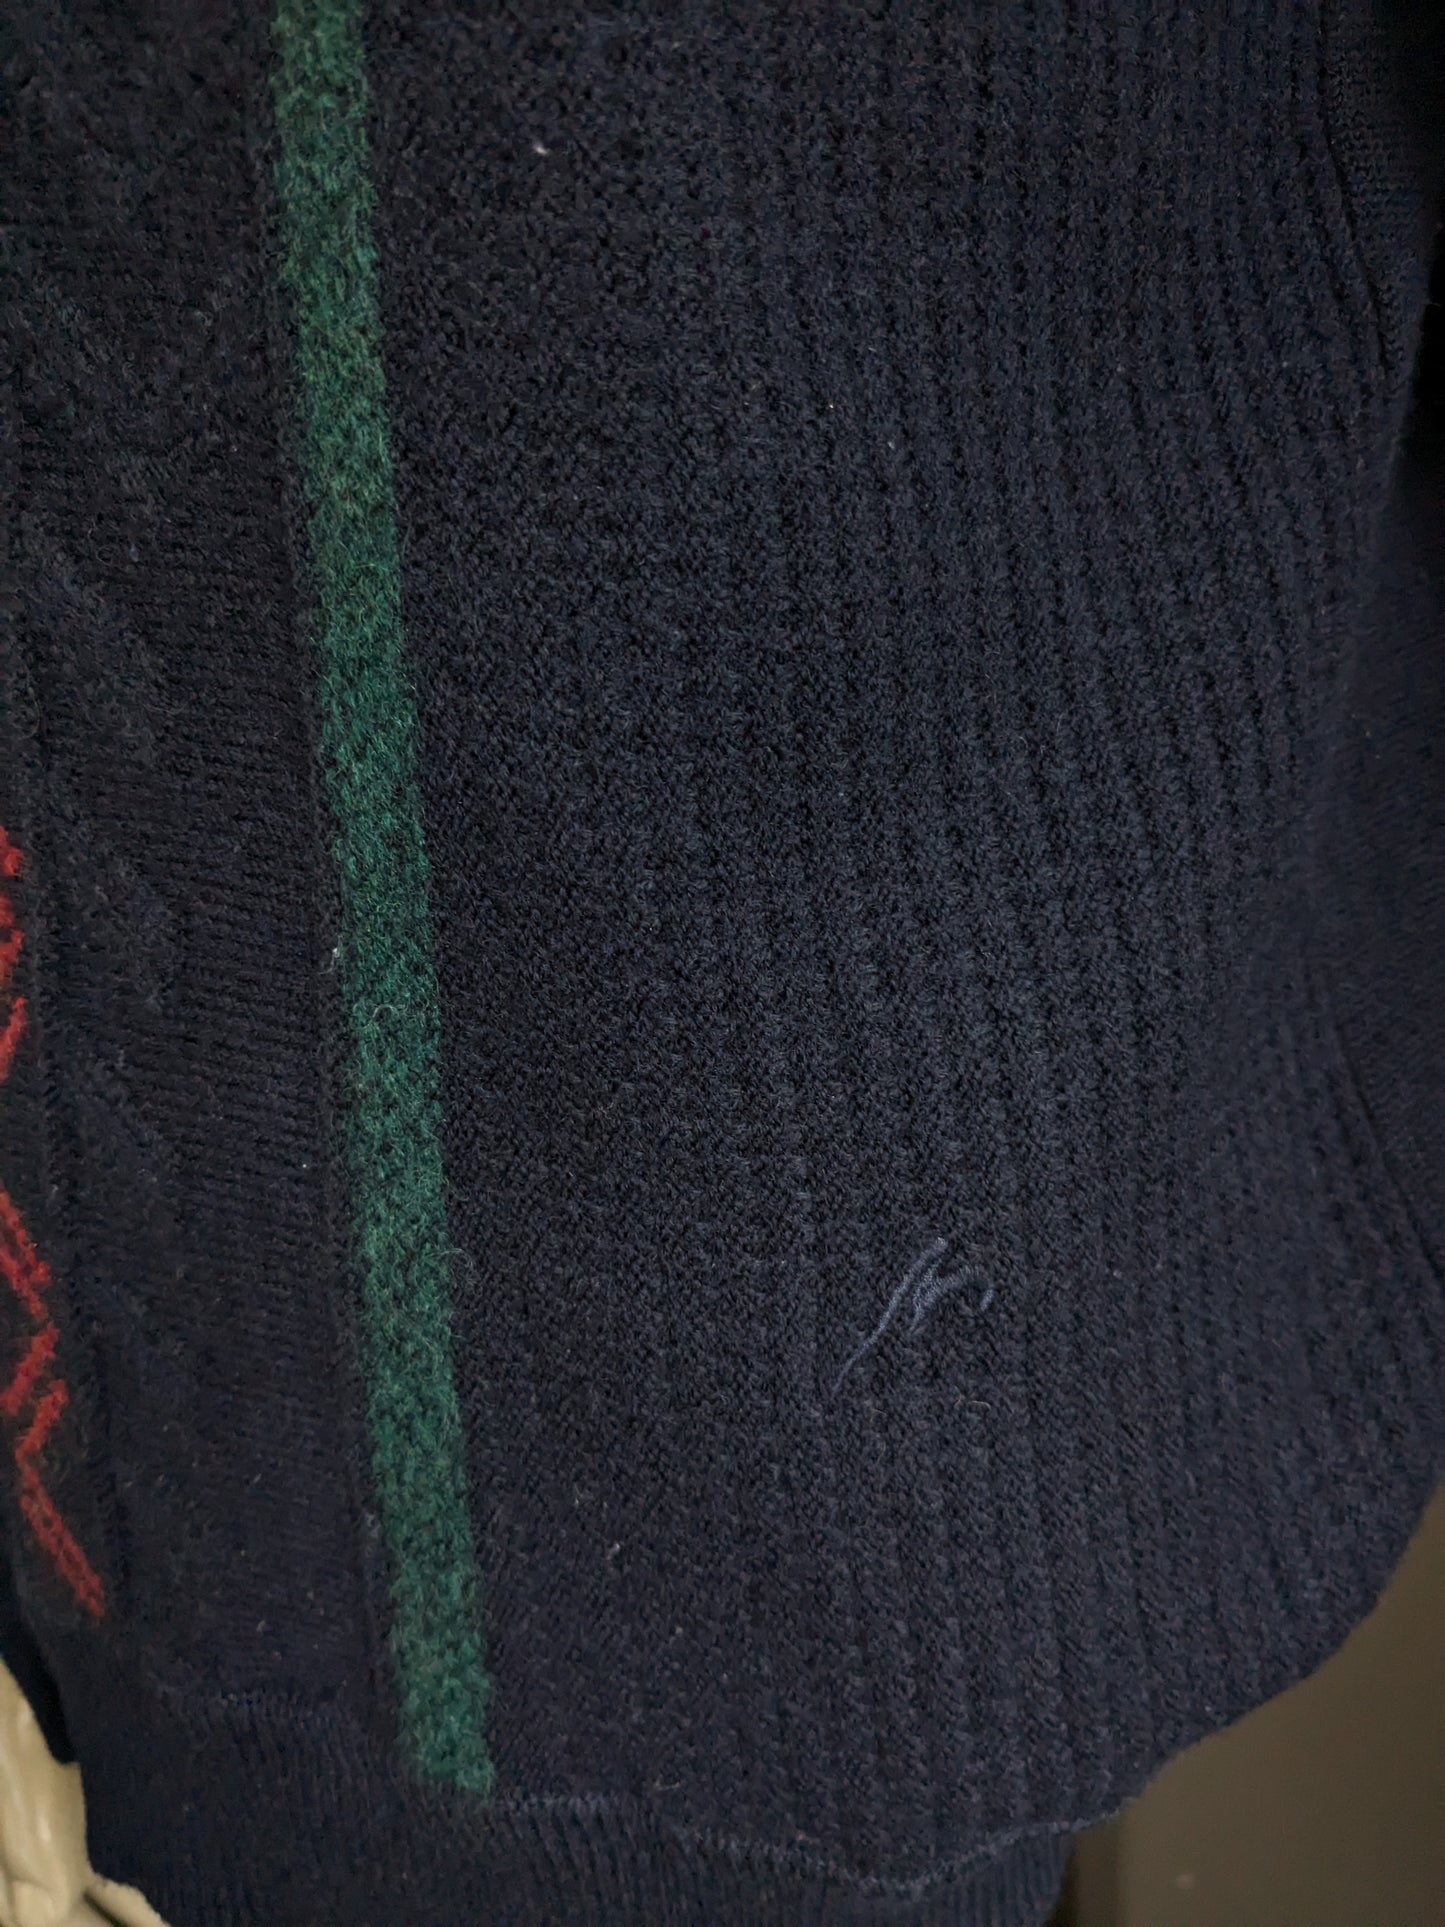 Vintage maselli wool sweater with v-neck. Dark blue with yellow red green blue motif. Size L.